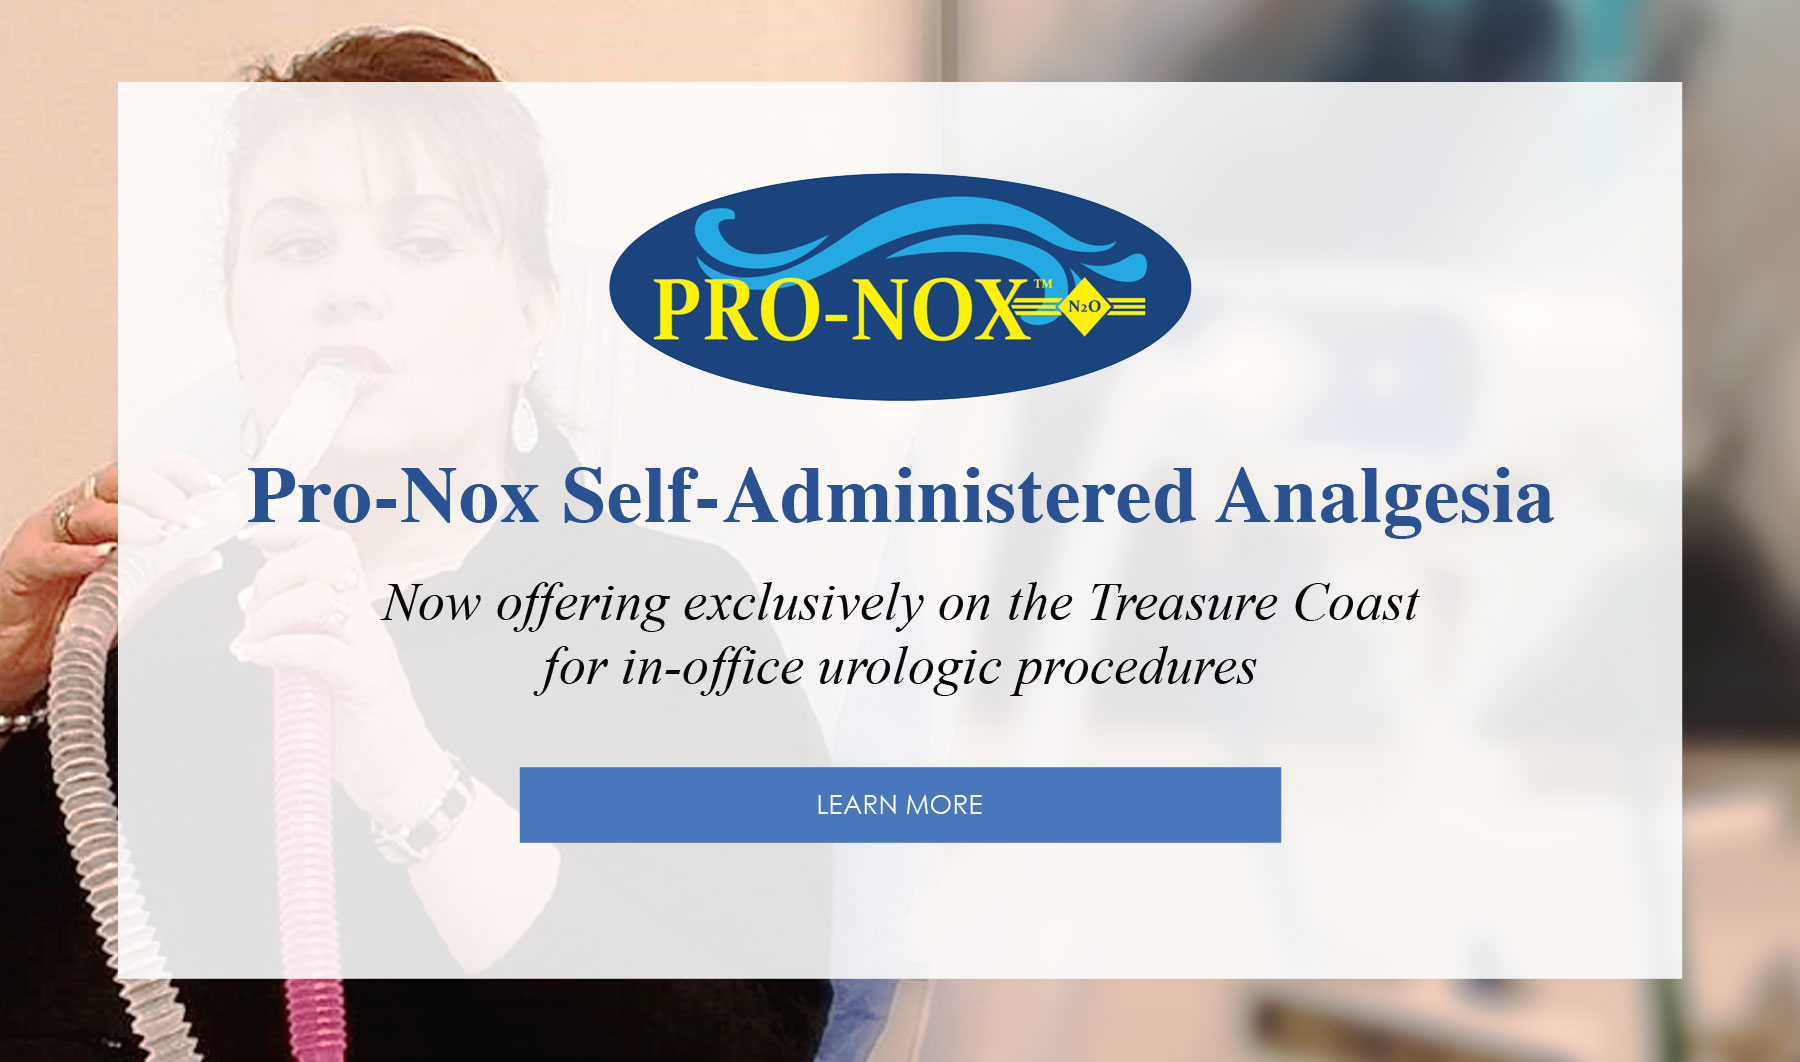 Pro-Nox self-administered analgesia offered for in-office urologic procedures.